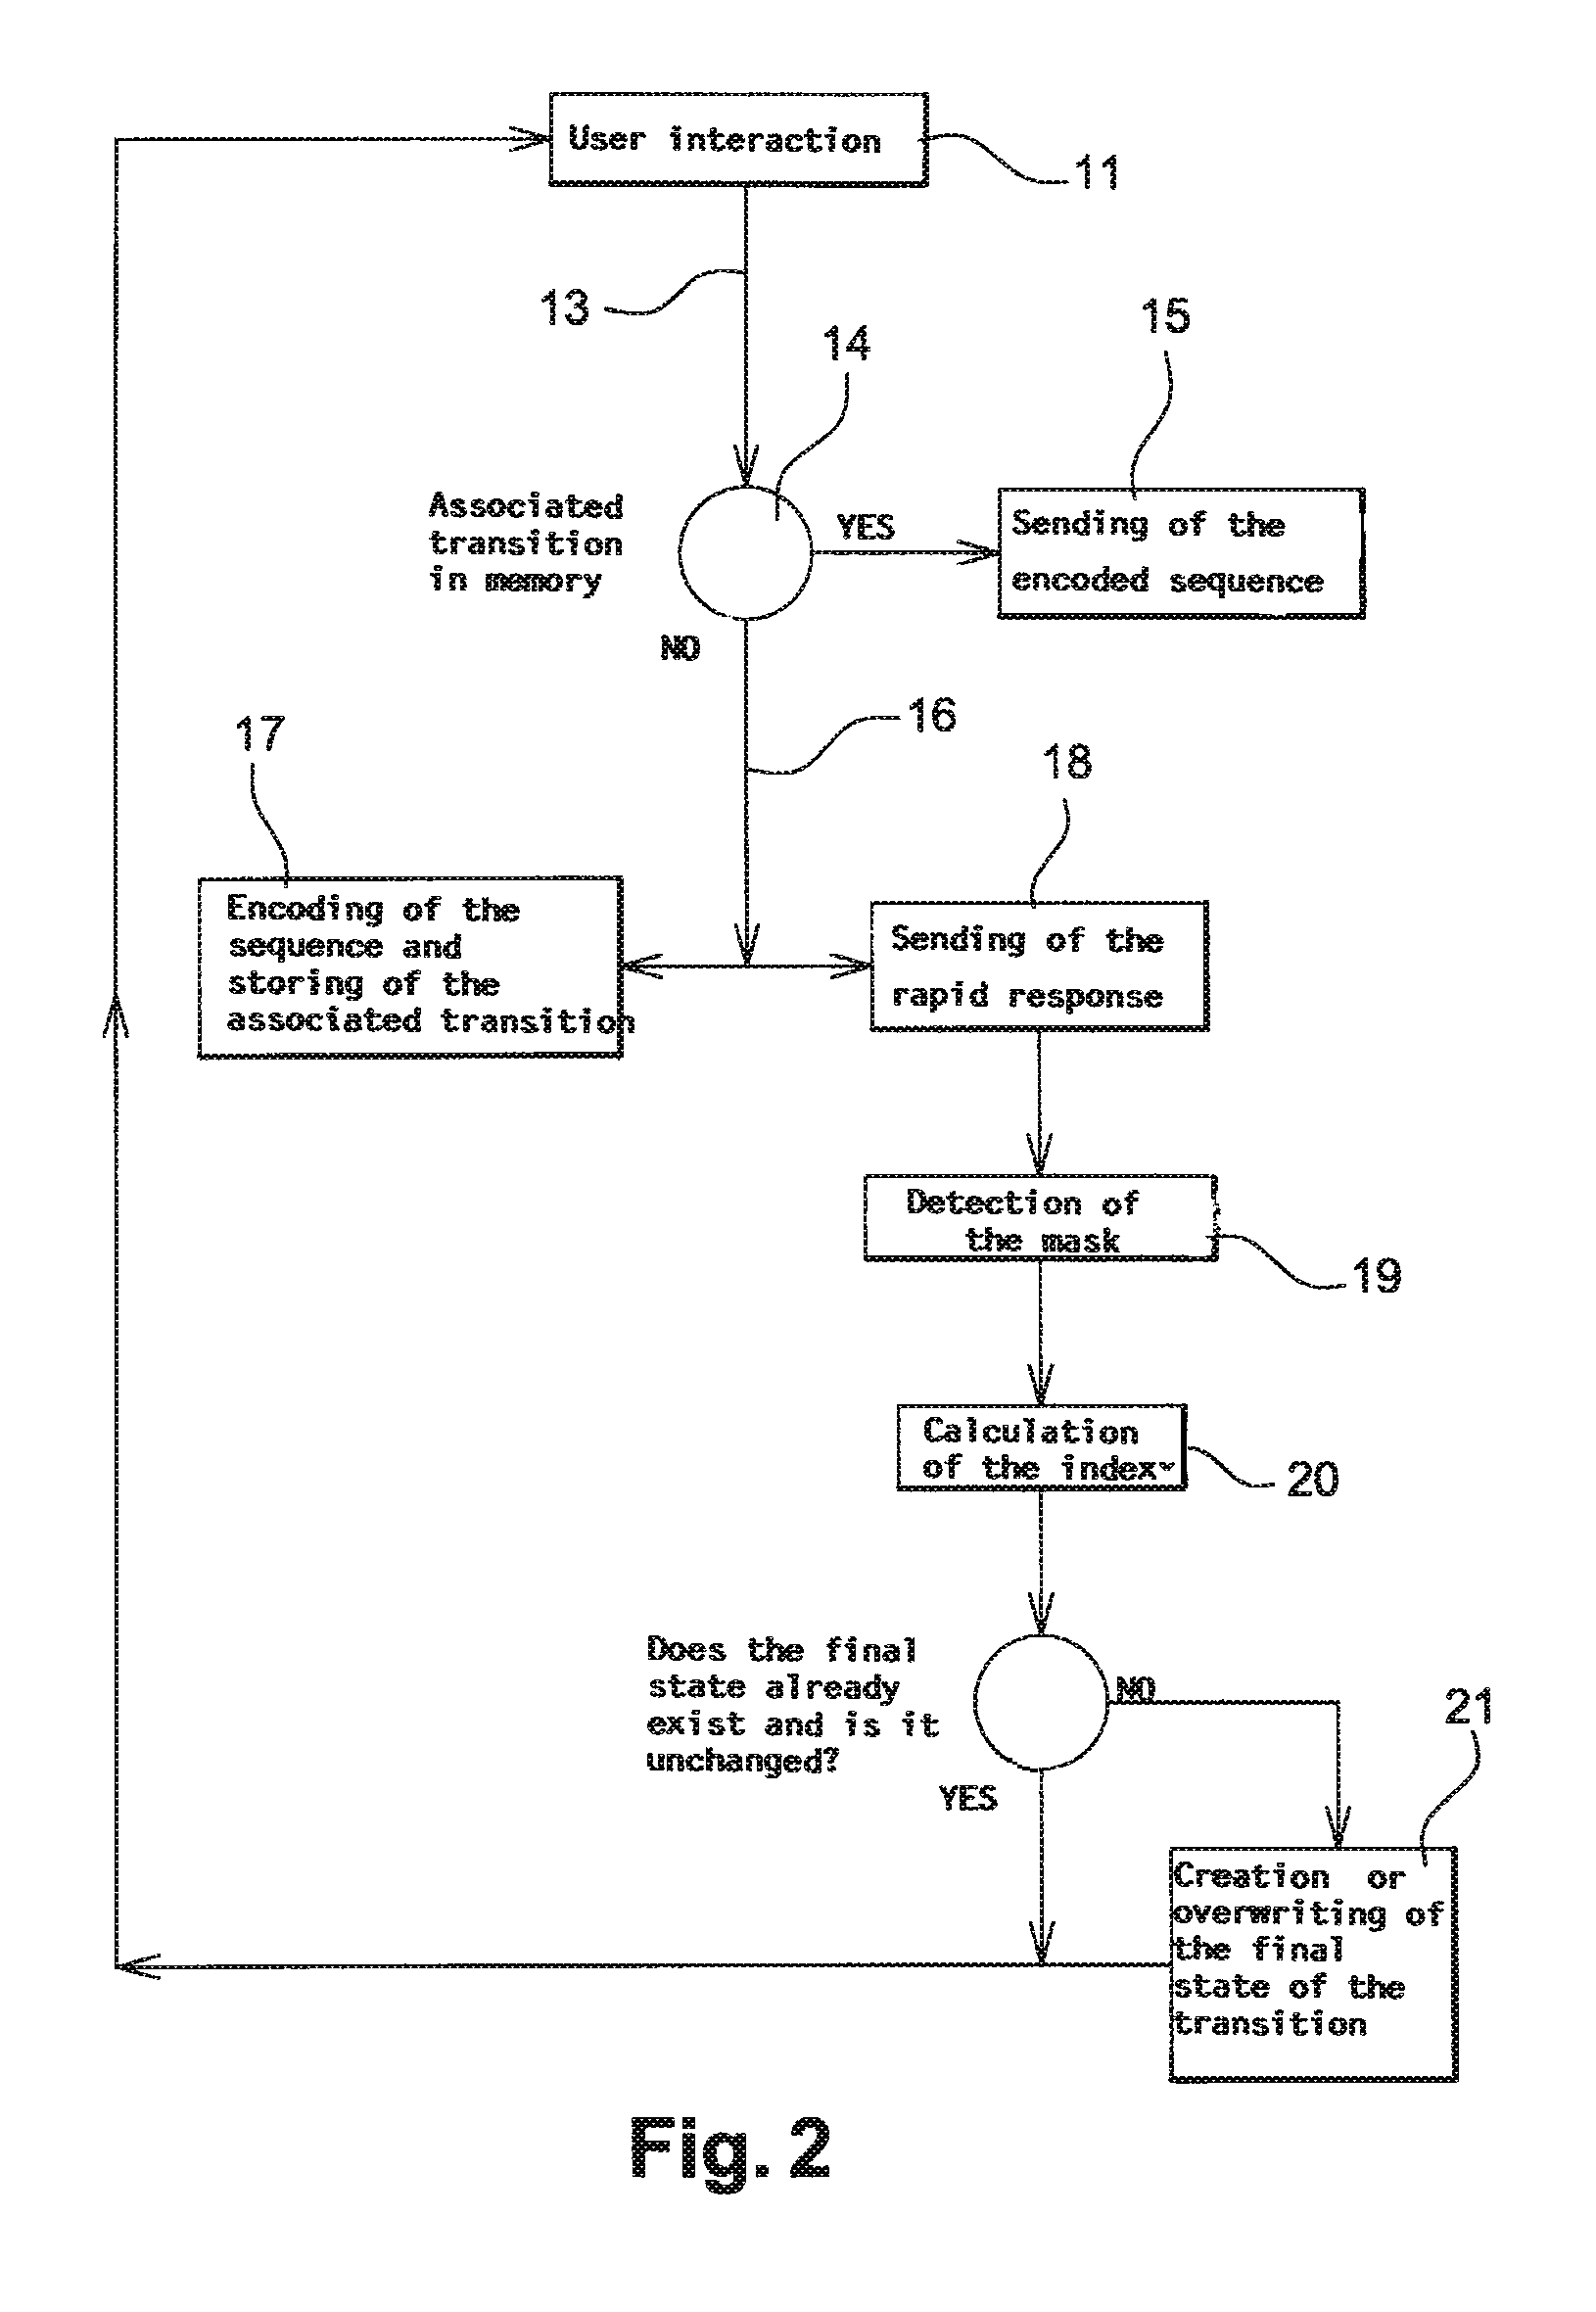 Method for the delivery of audio and video data sequences by a server